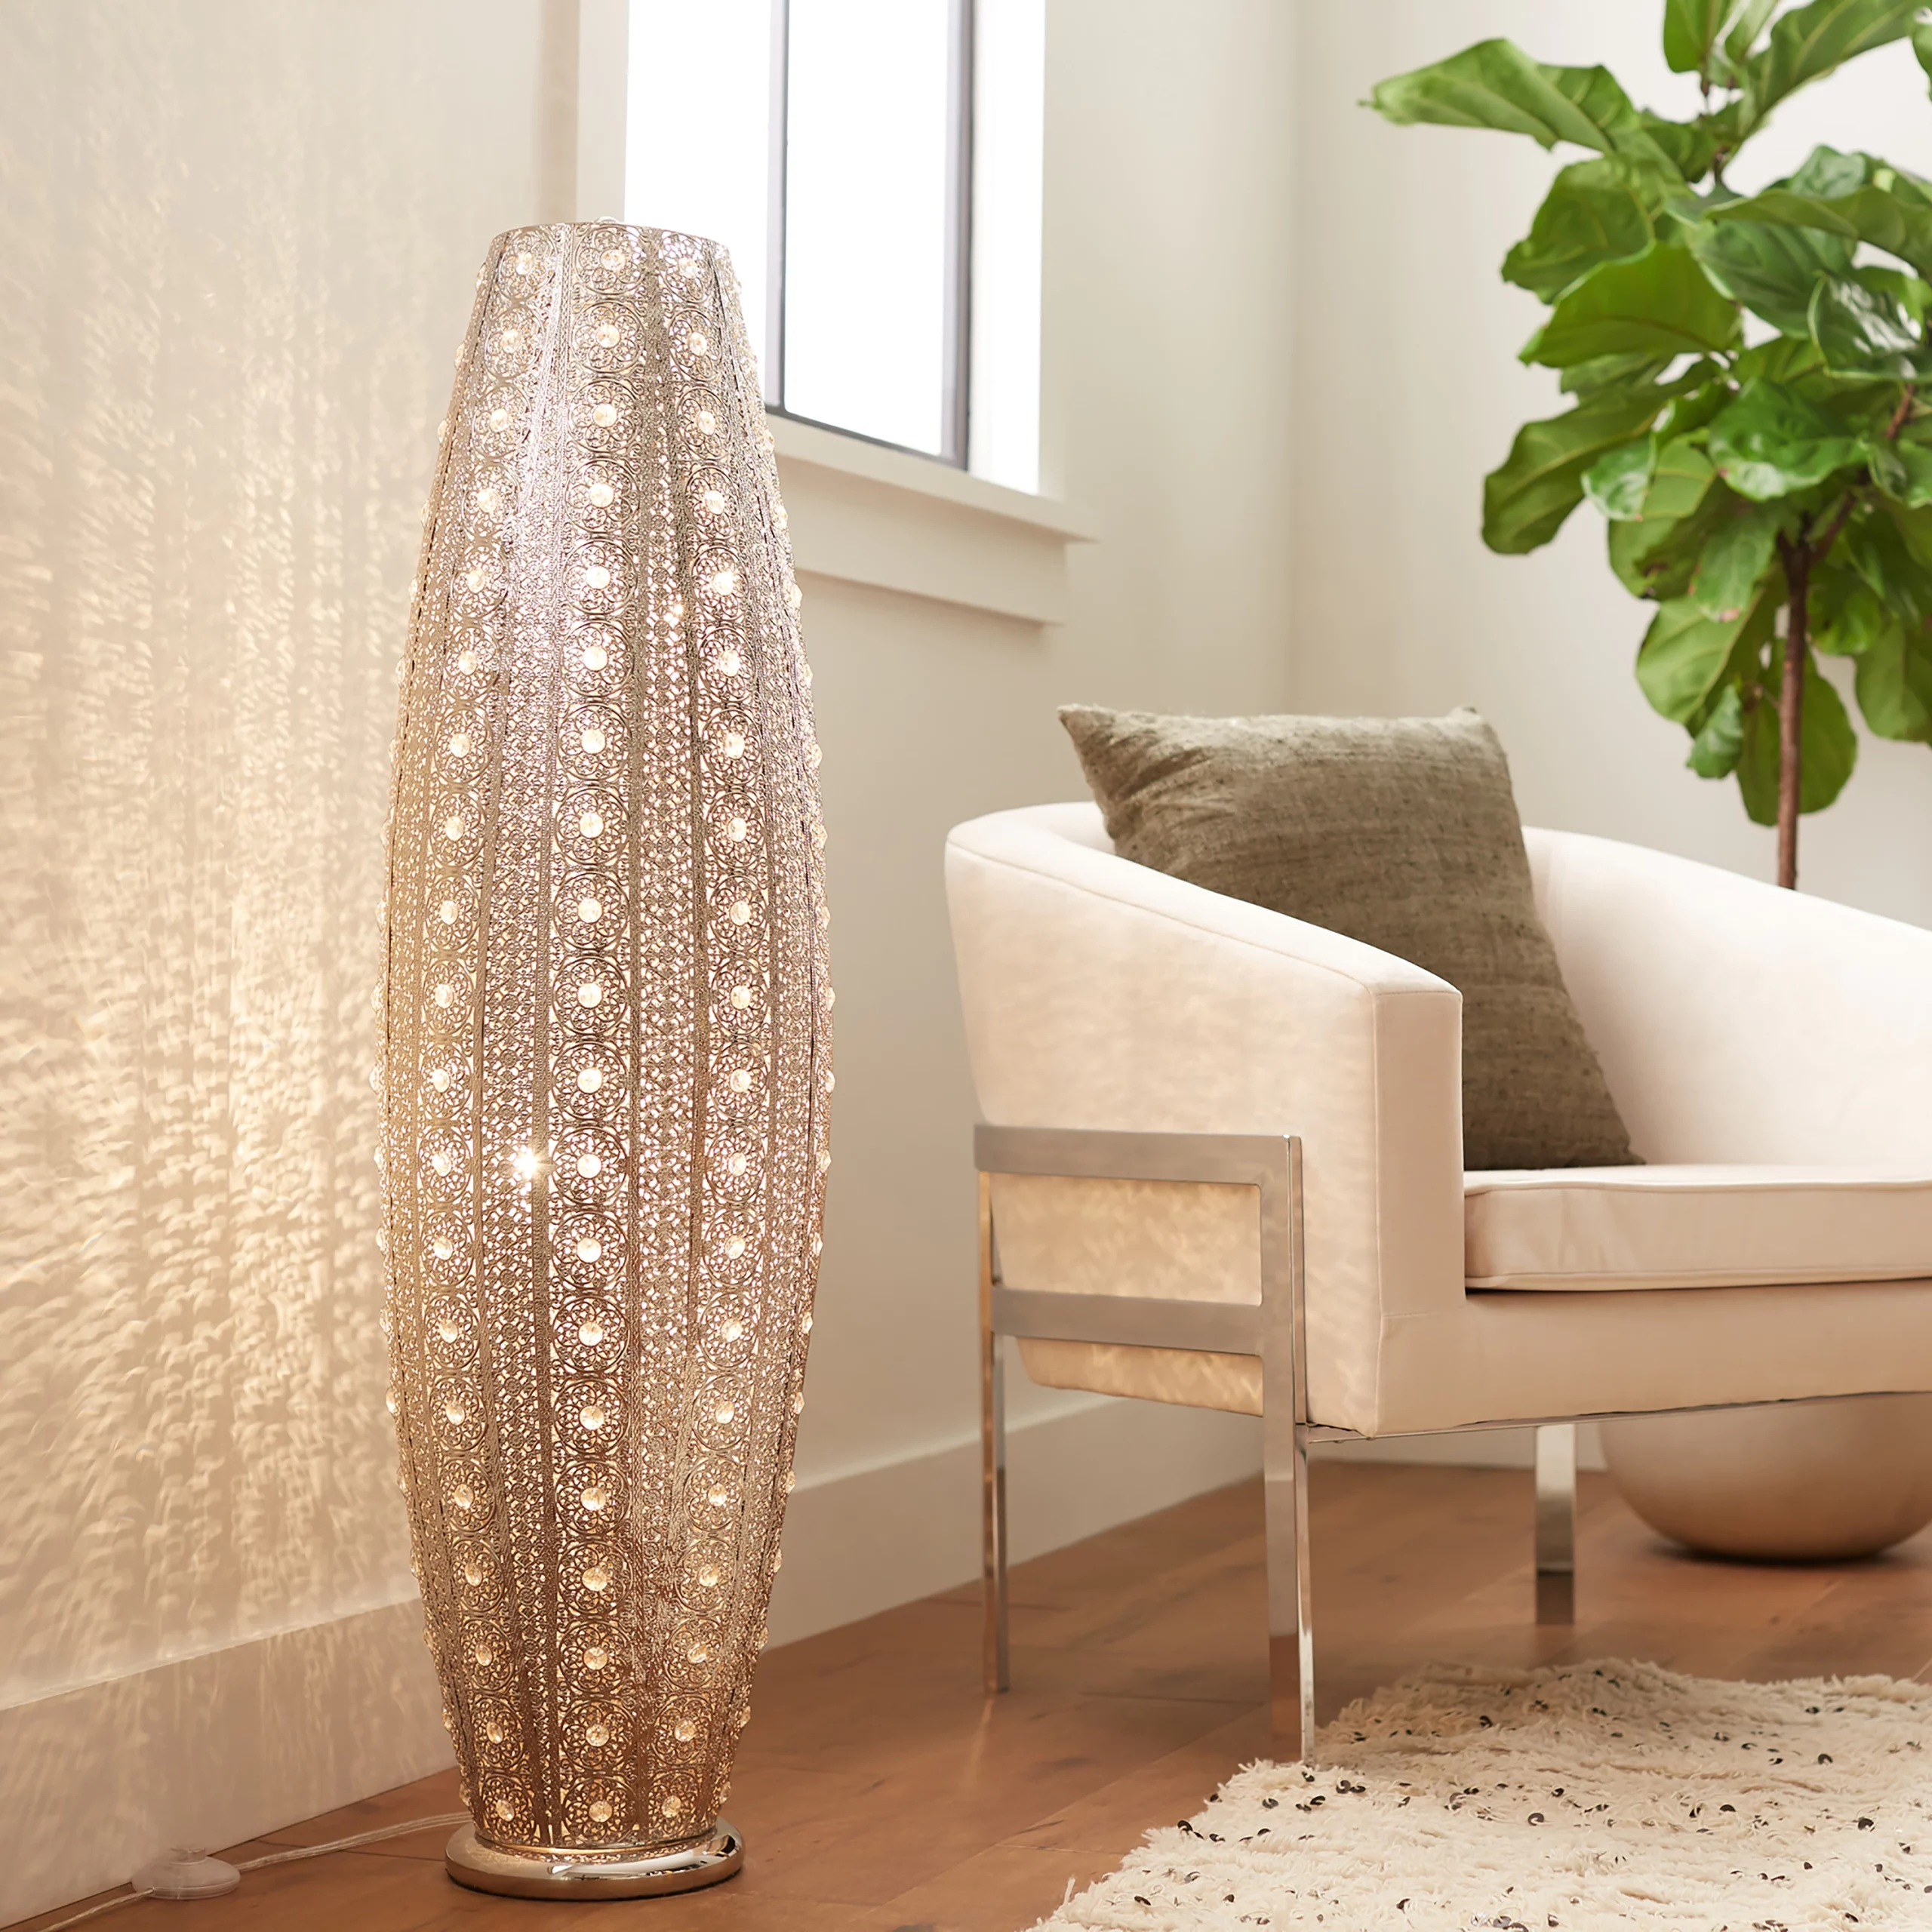 Light Up Your Reading Chair with a Small Floor Lamp